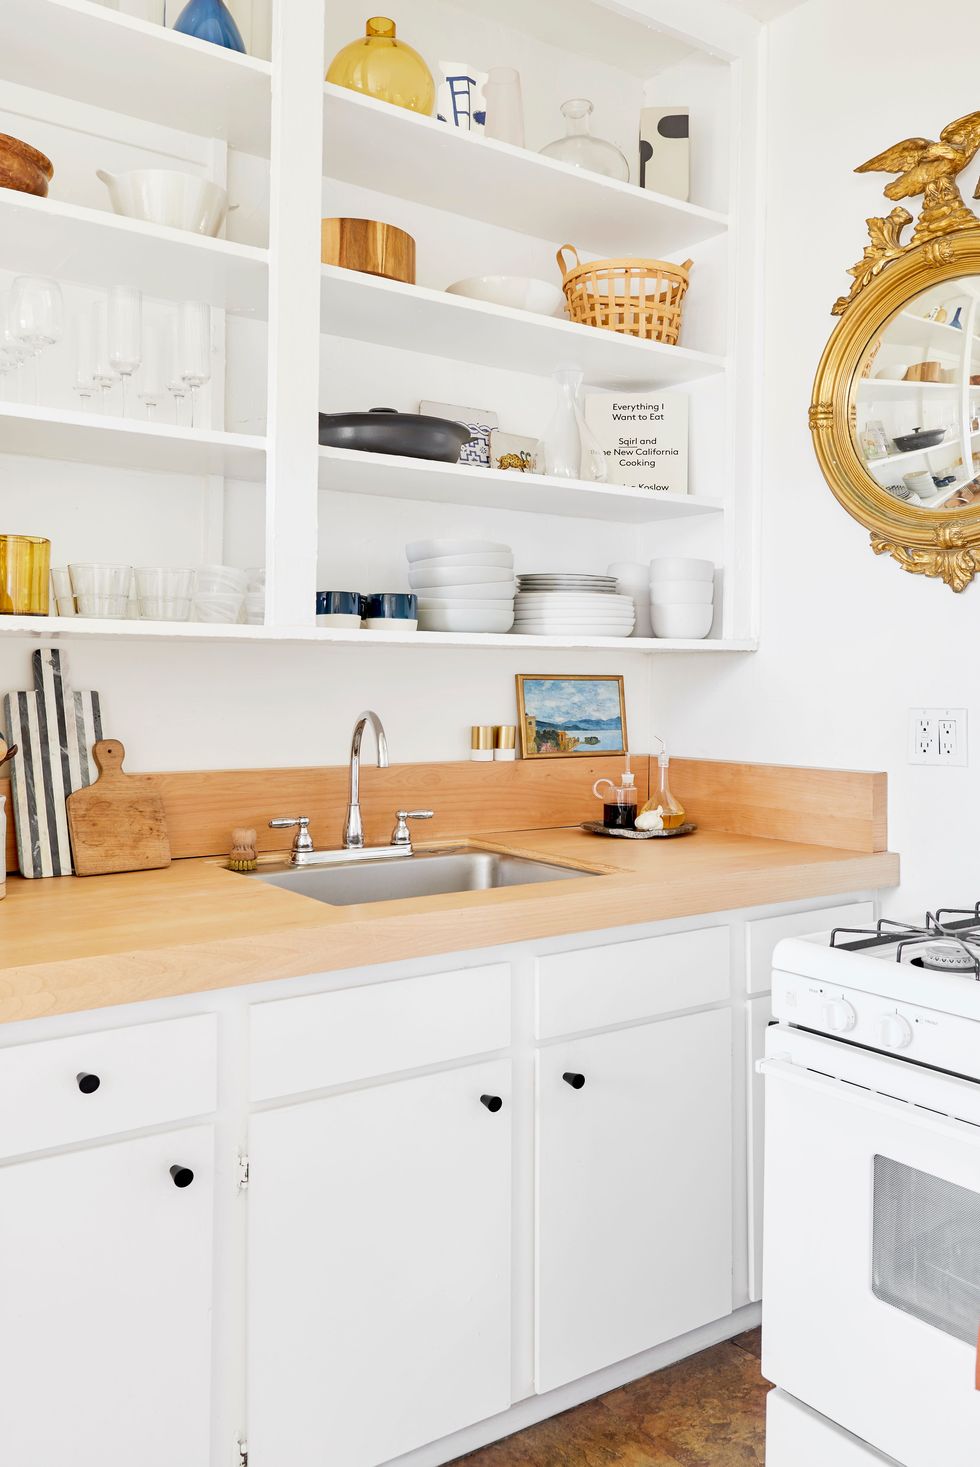 7 Kitchen Design Ideas for Tiny Homes to Maximize Space